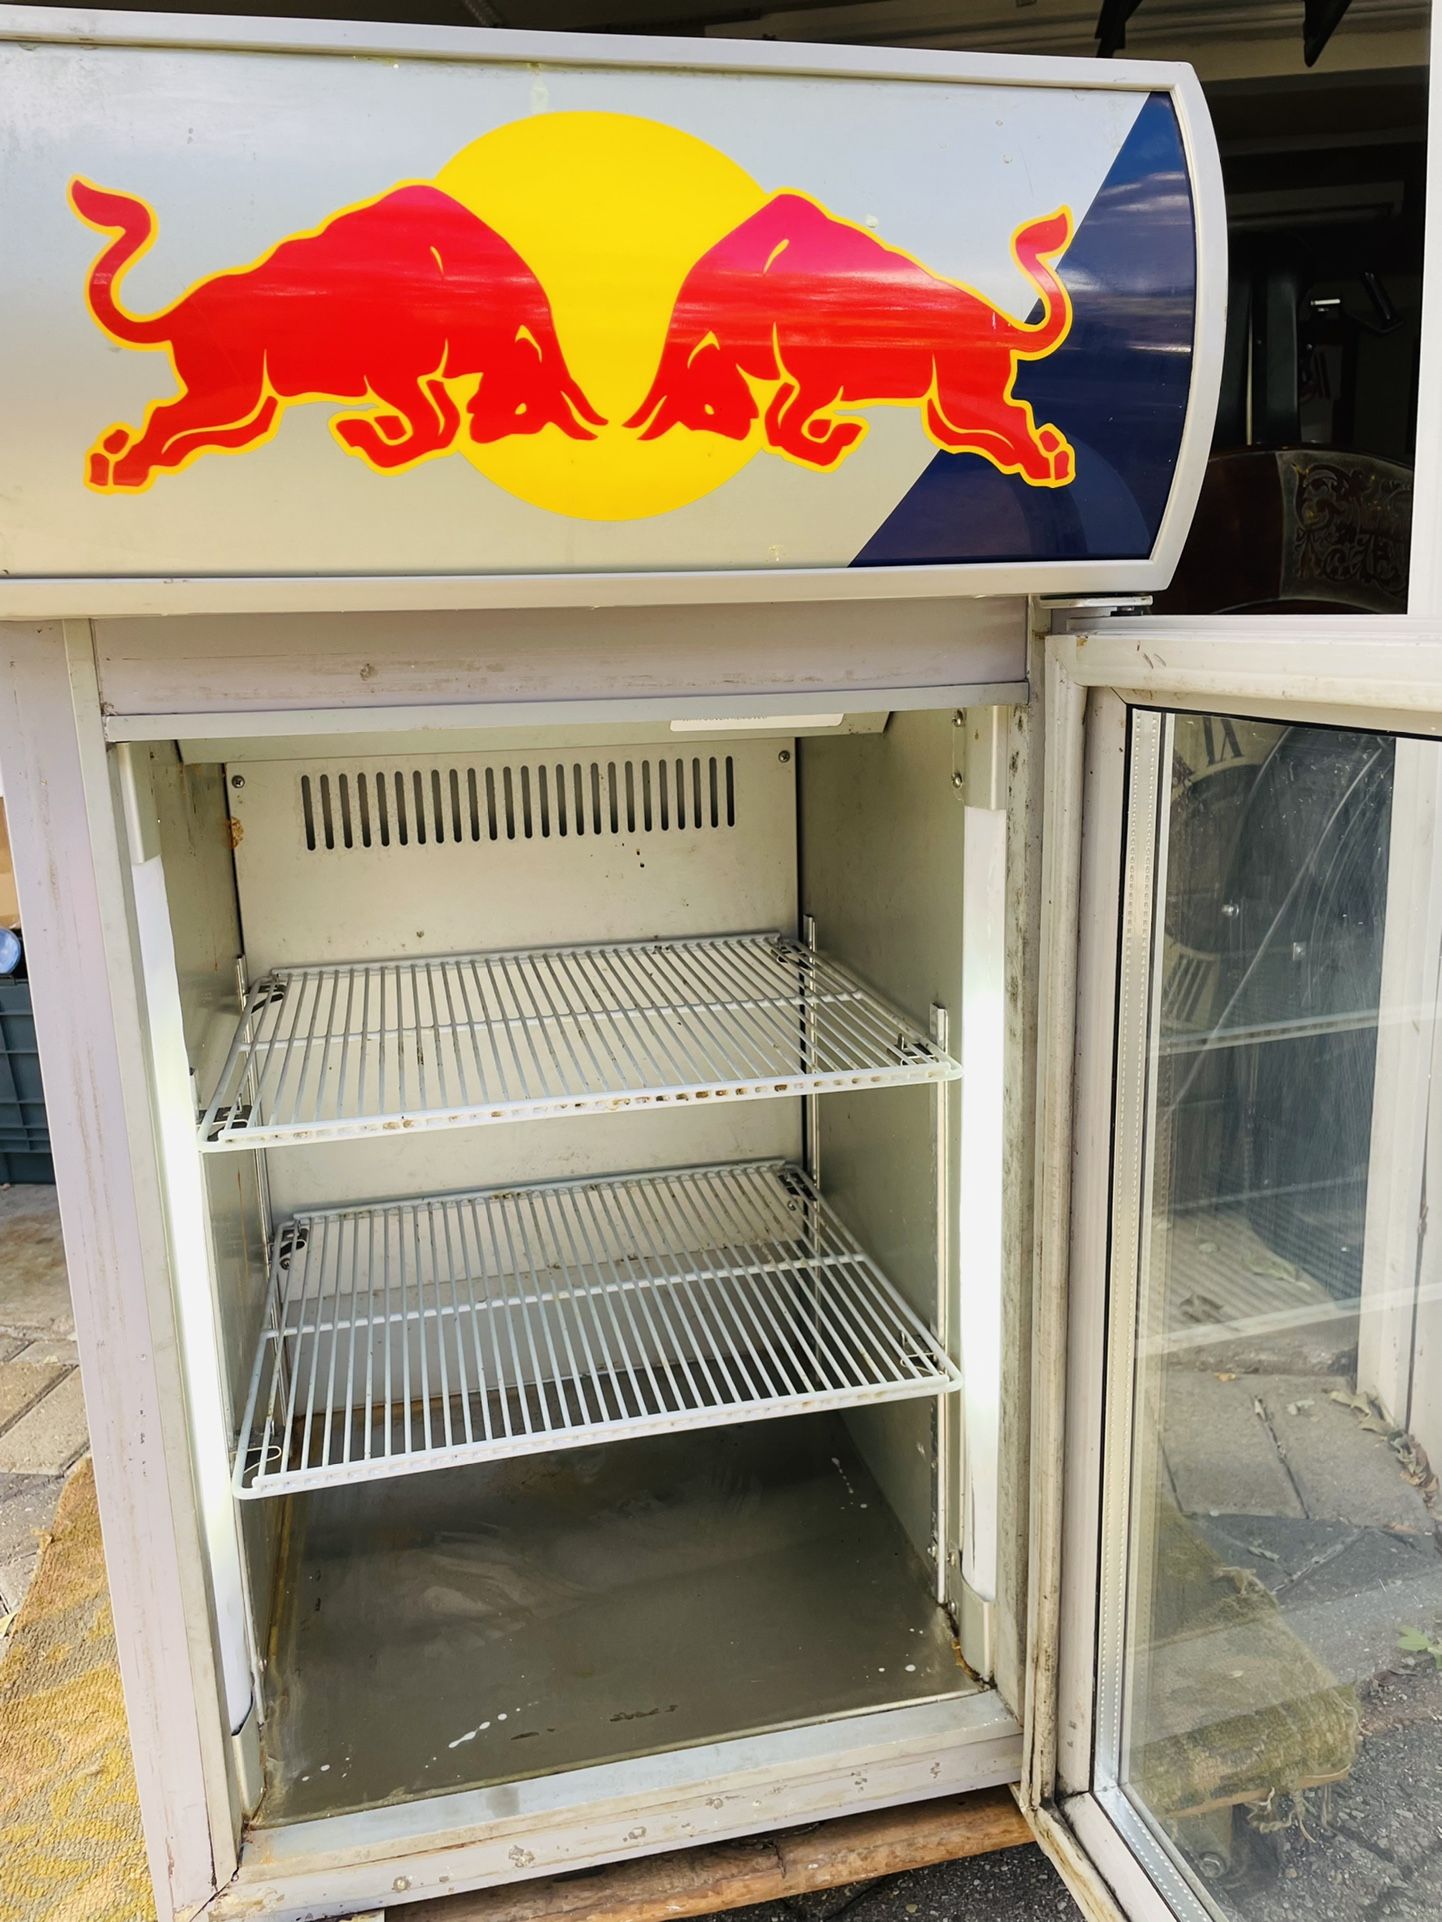 Red Bull Mini Fridge Table Top Refrigerator M034 Vestfrost Solutions for  Sale in Hilldale, PA - OfferUp